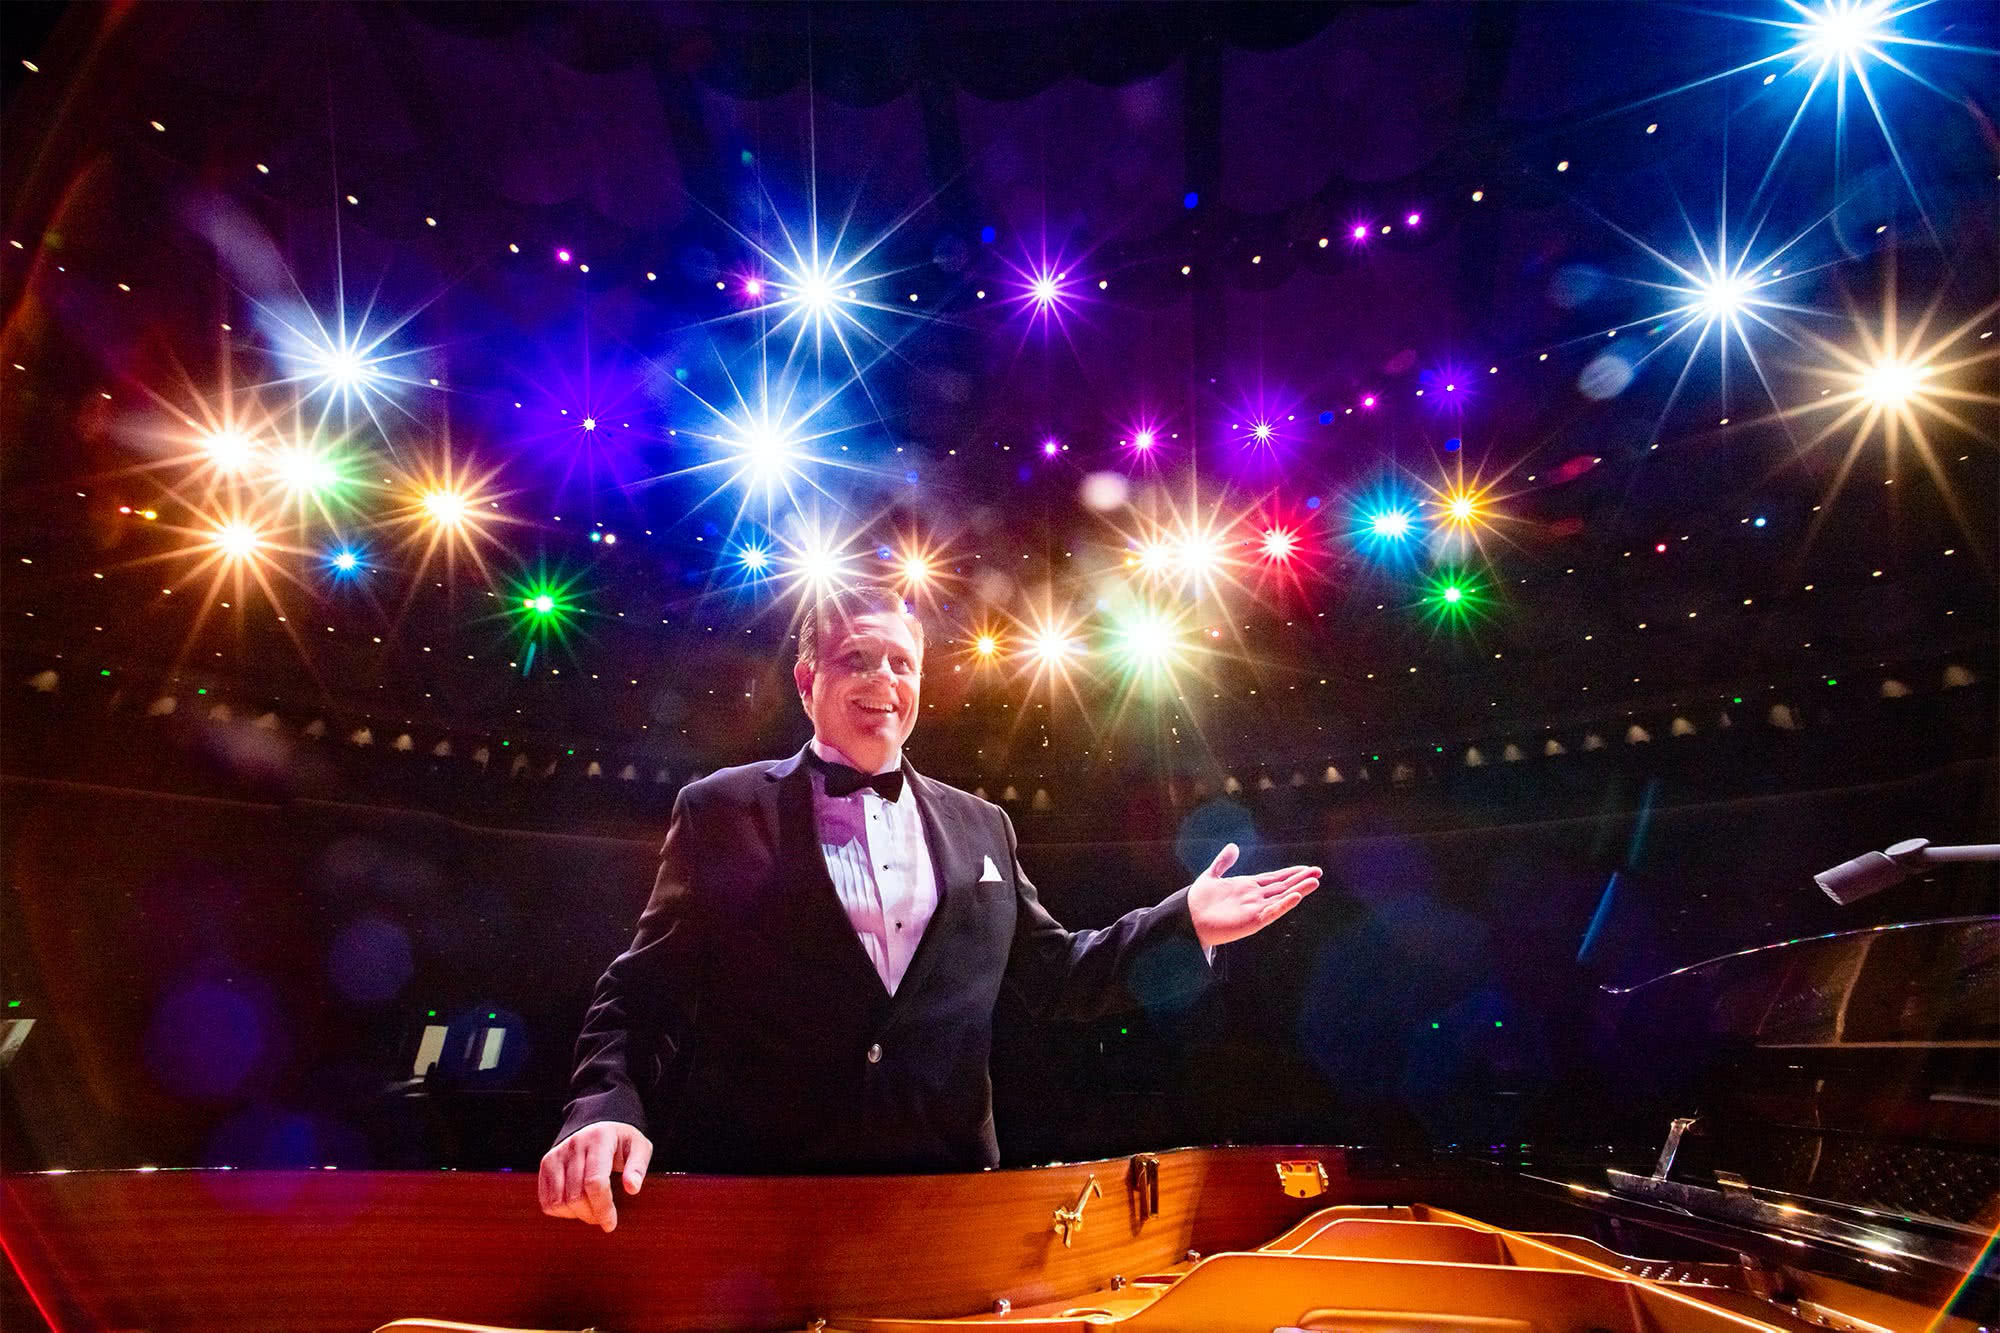 Anthony Kearns faces the stage with multi-colored lights shining behind him